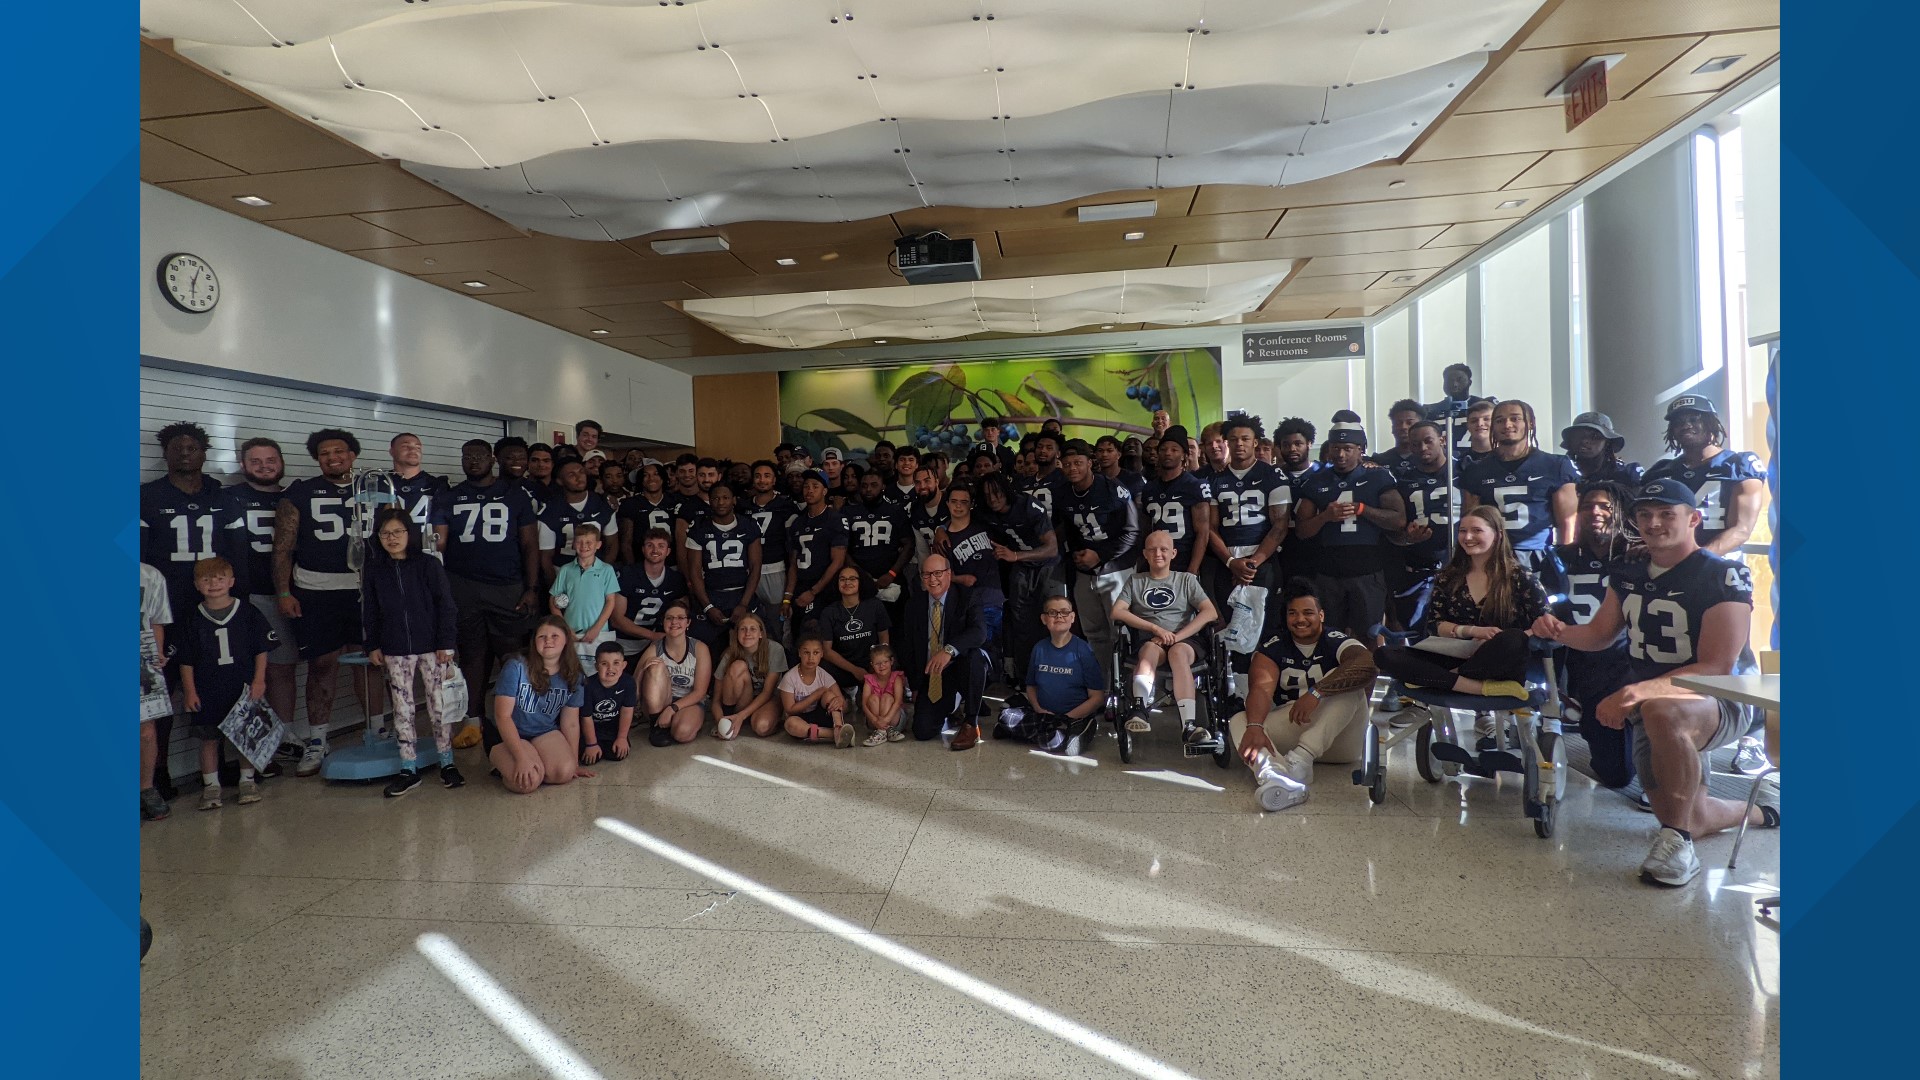 The Nittany Lions football team made a special visit to Penn State Health Children's Hospital for the first time in more than three years.